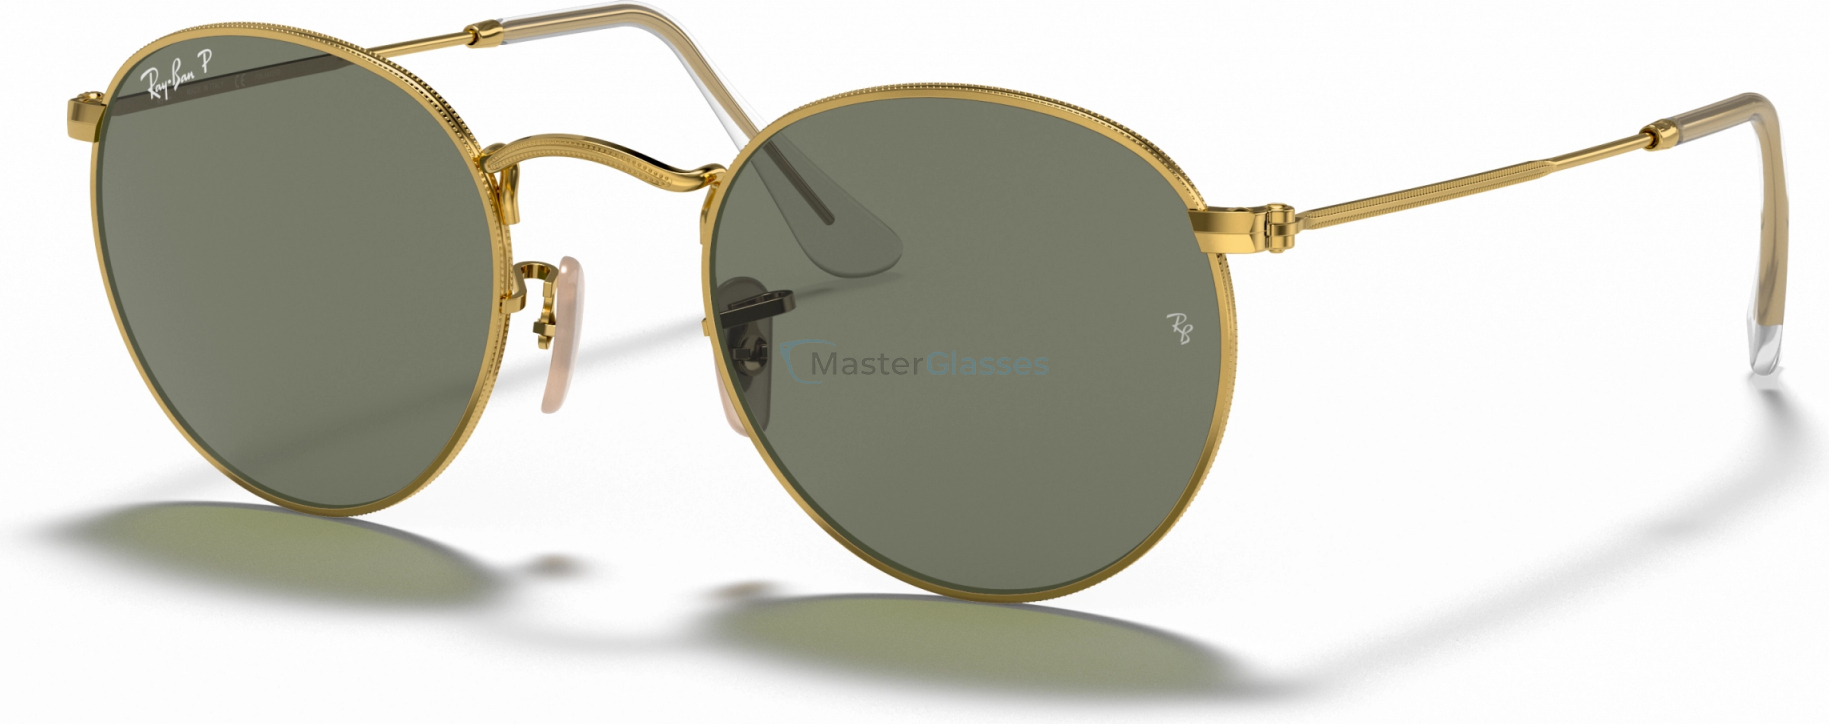   Ray-Ban ROUND METAL RB3447 001/58 Gold